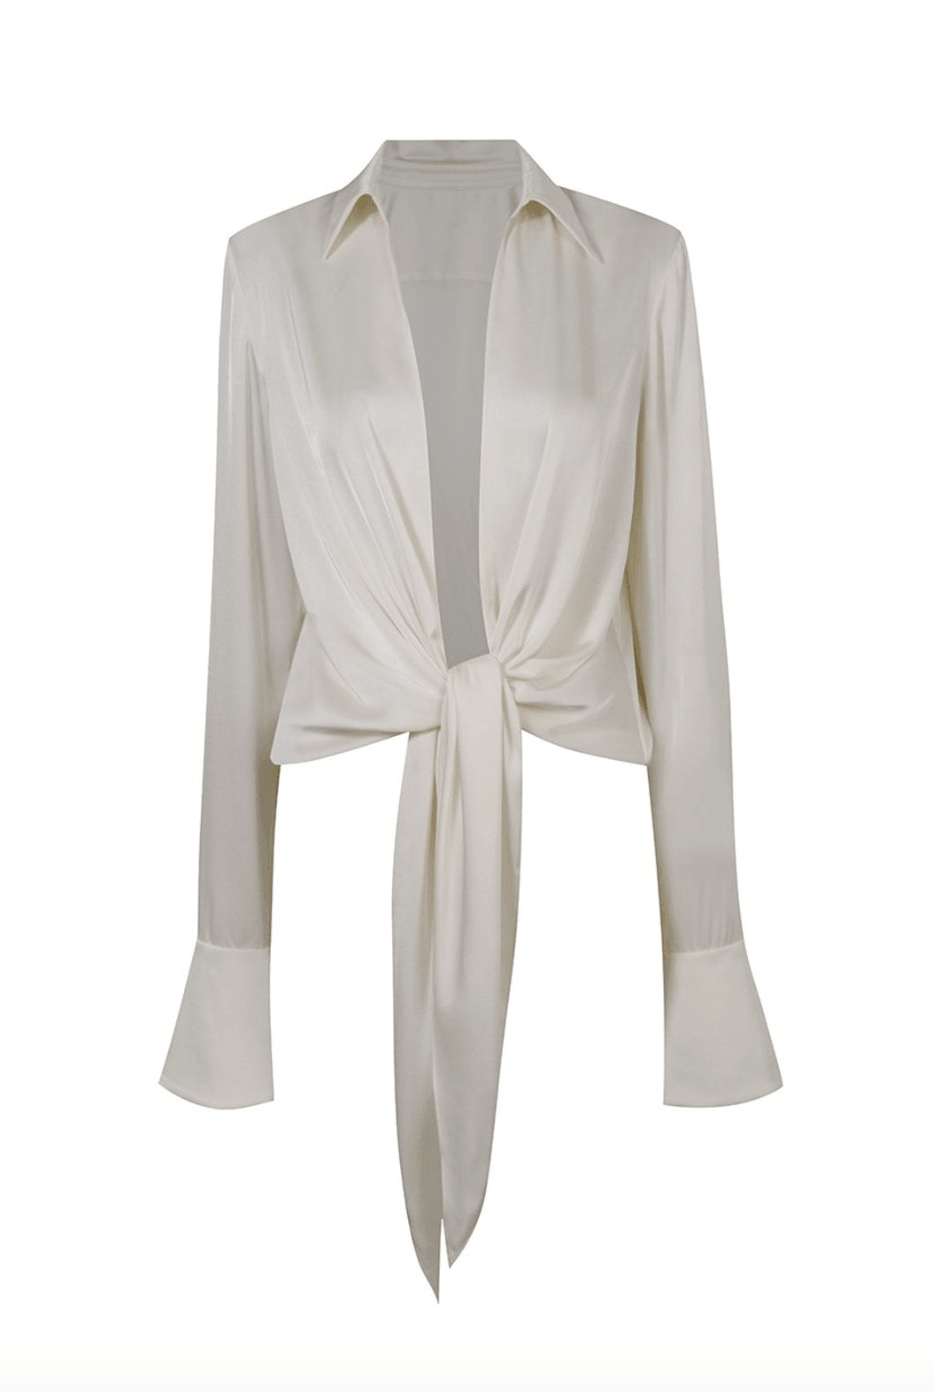 Harlow Blouse in Ivory - Endless